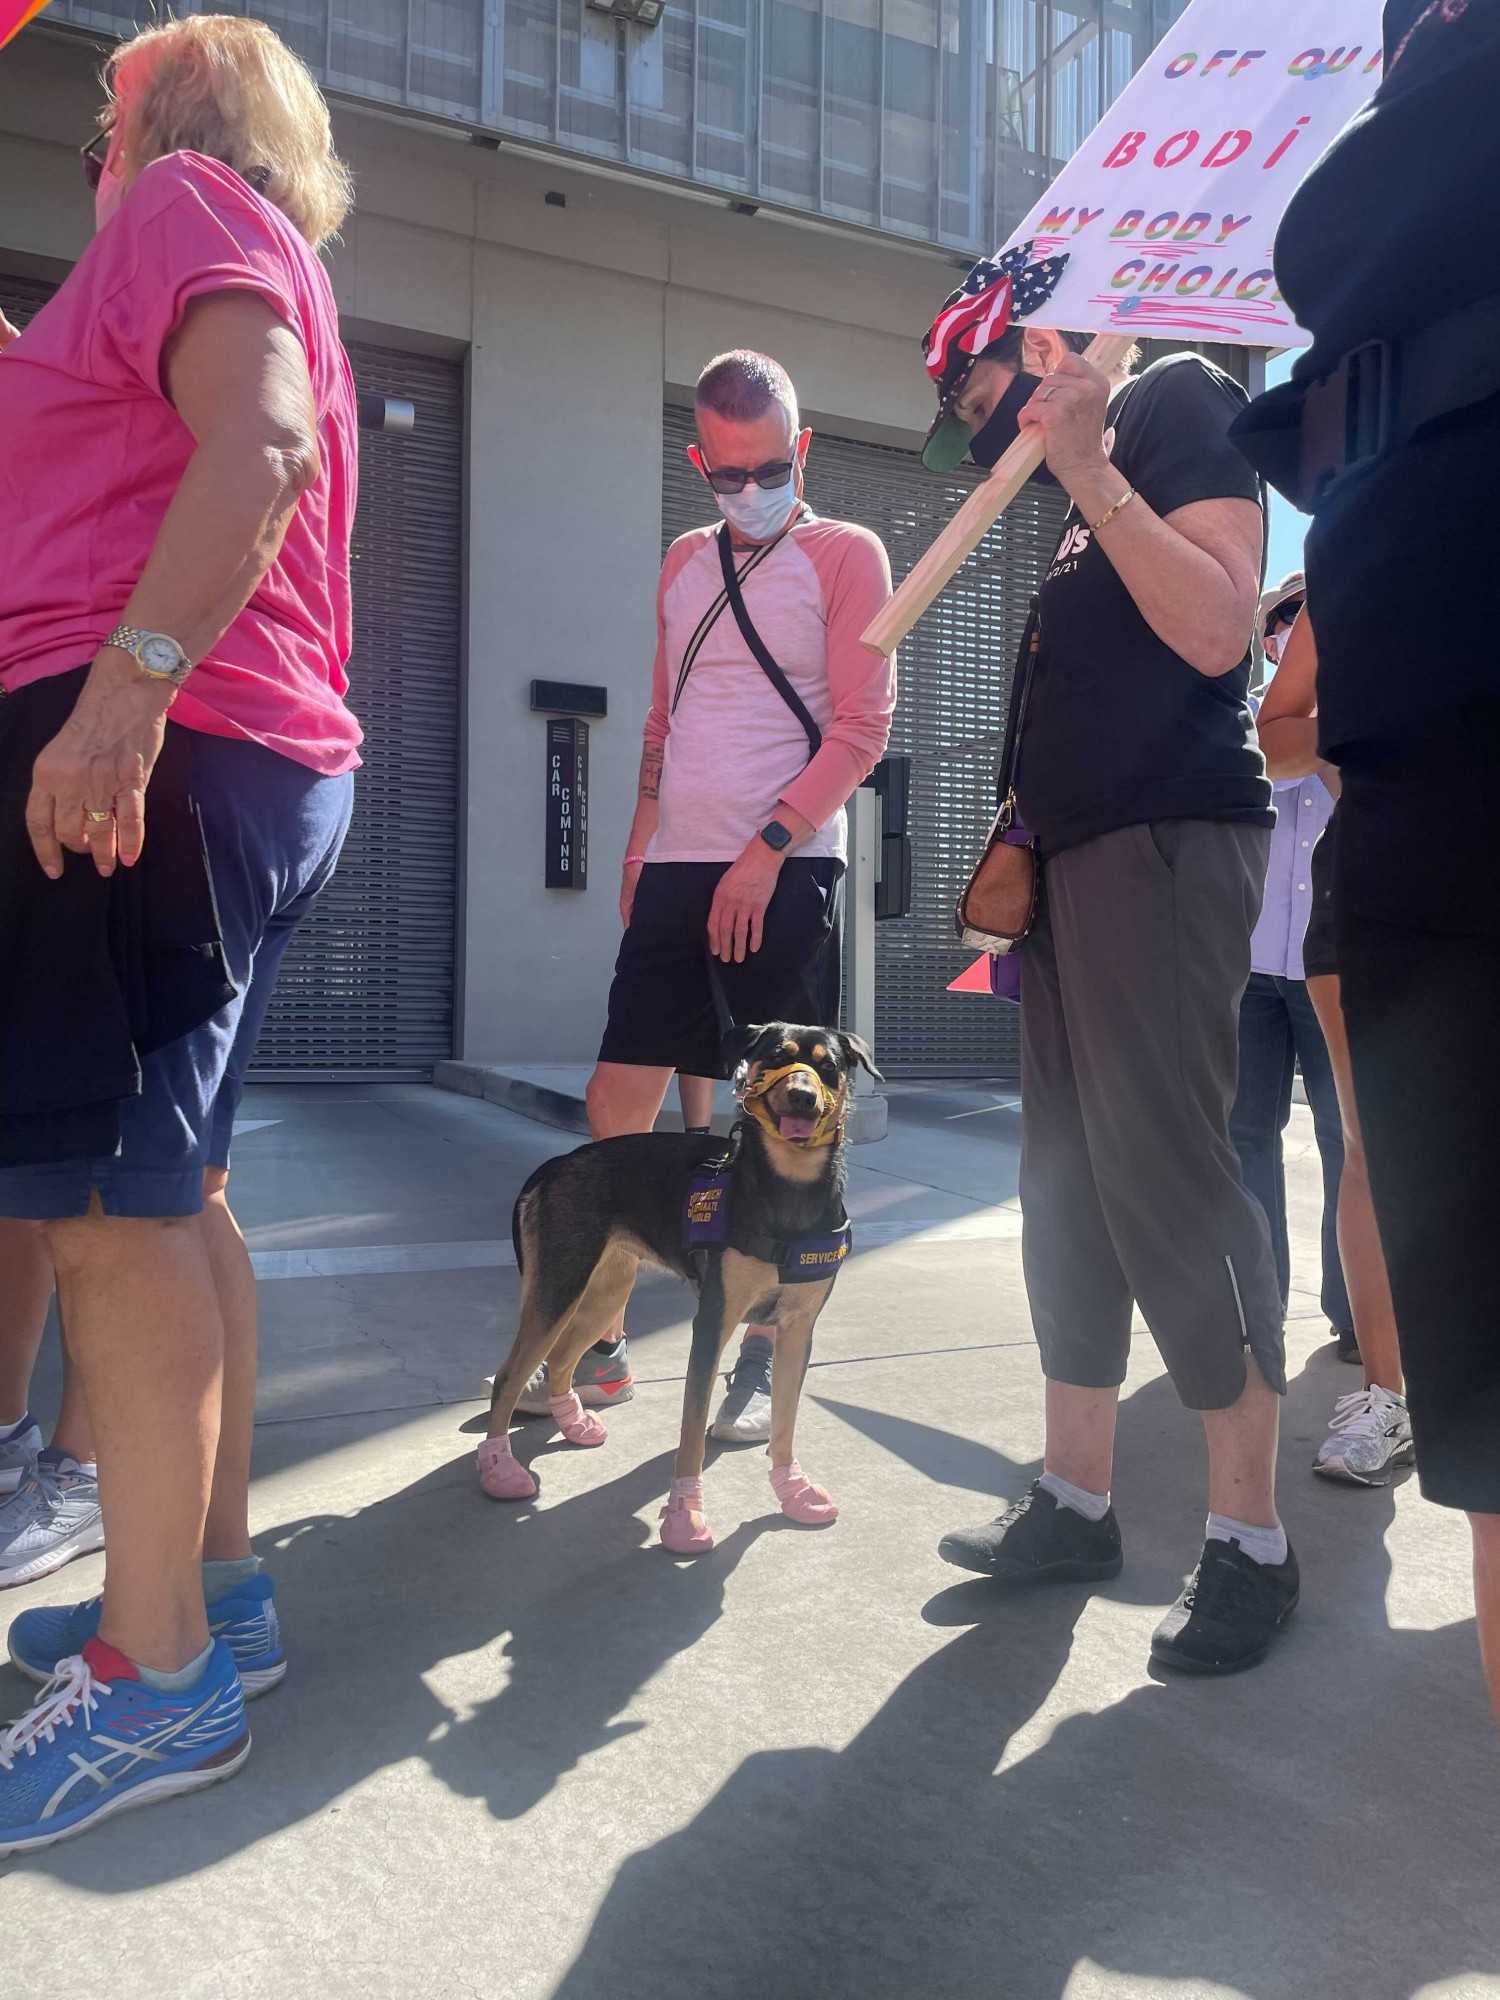 A women’s march attendee with their dog on Oct. 2, 2021. Individuals across all genders, ages and species were in attendance at Saturday’s demonstration.